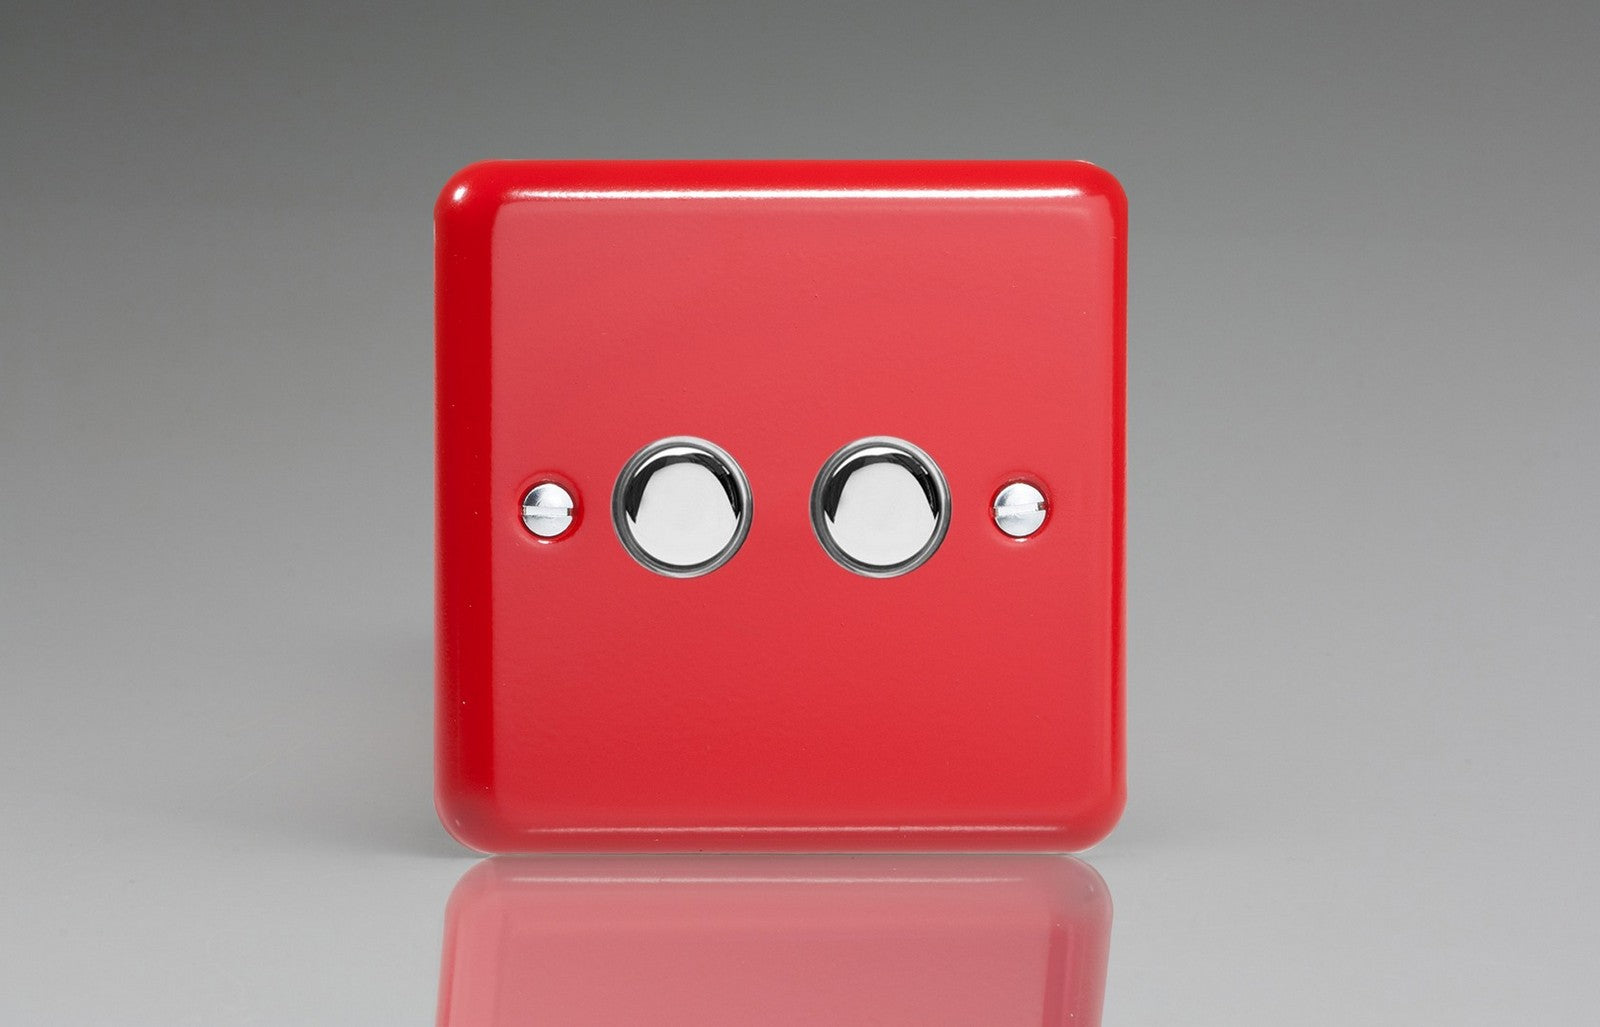 Varilight IJYS002.PR Lily Pillar Box Red 2-Gang Tactile Touch Control Dimming Slave for use with Master on 2-Way Circuits